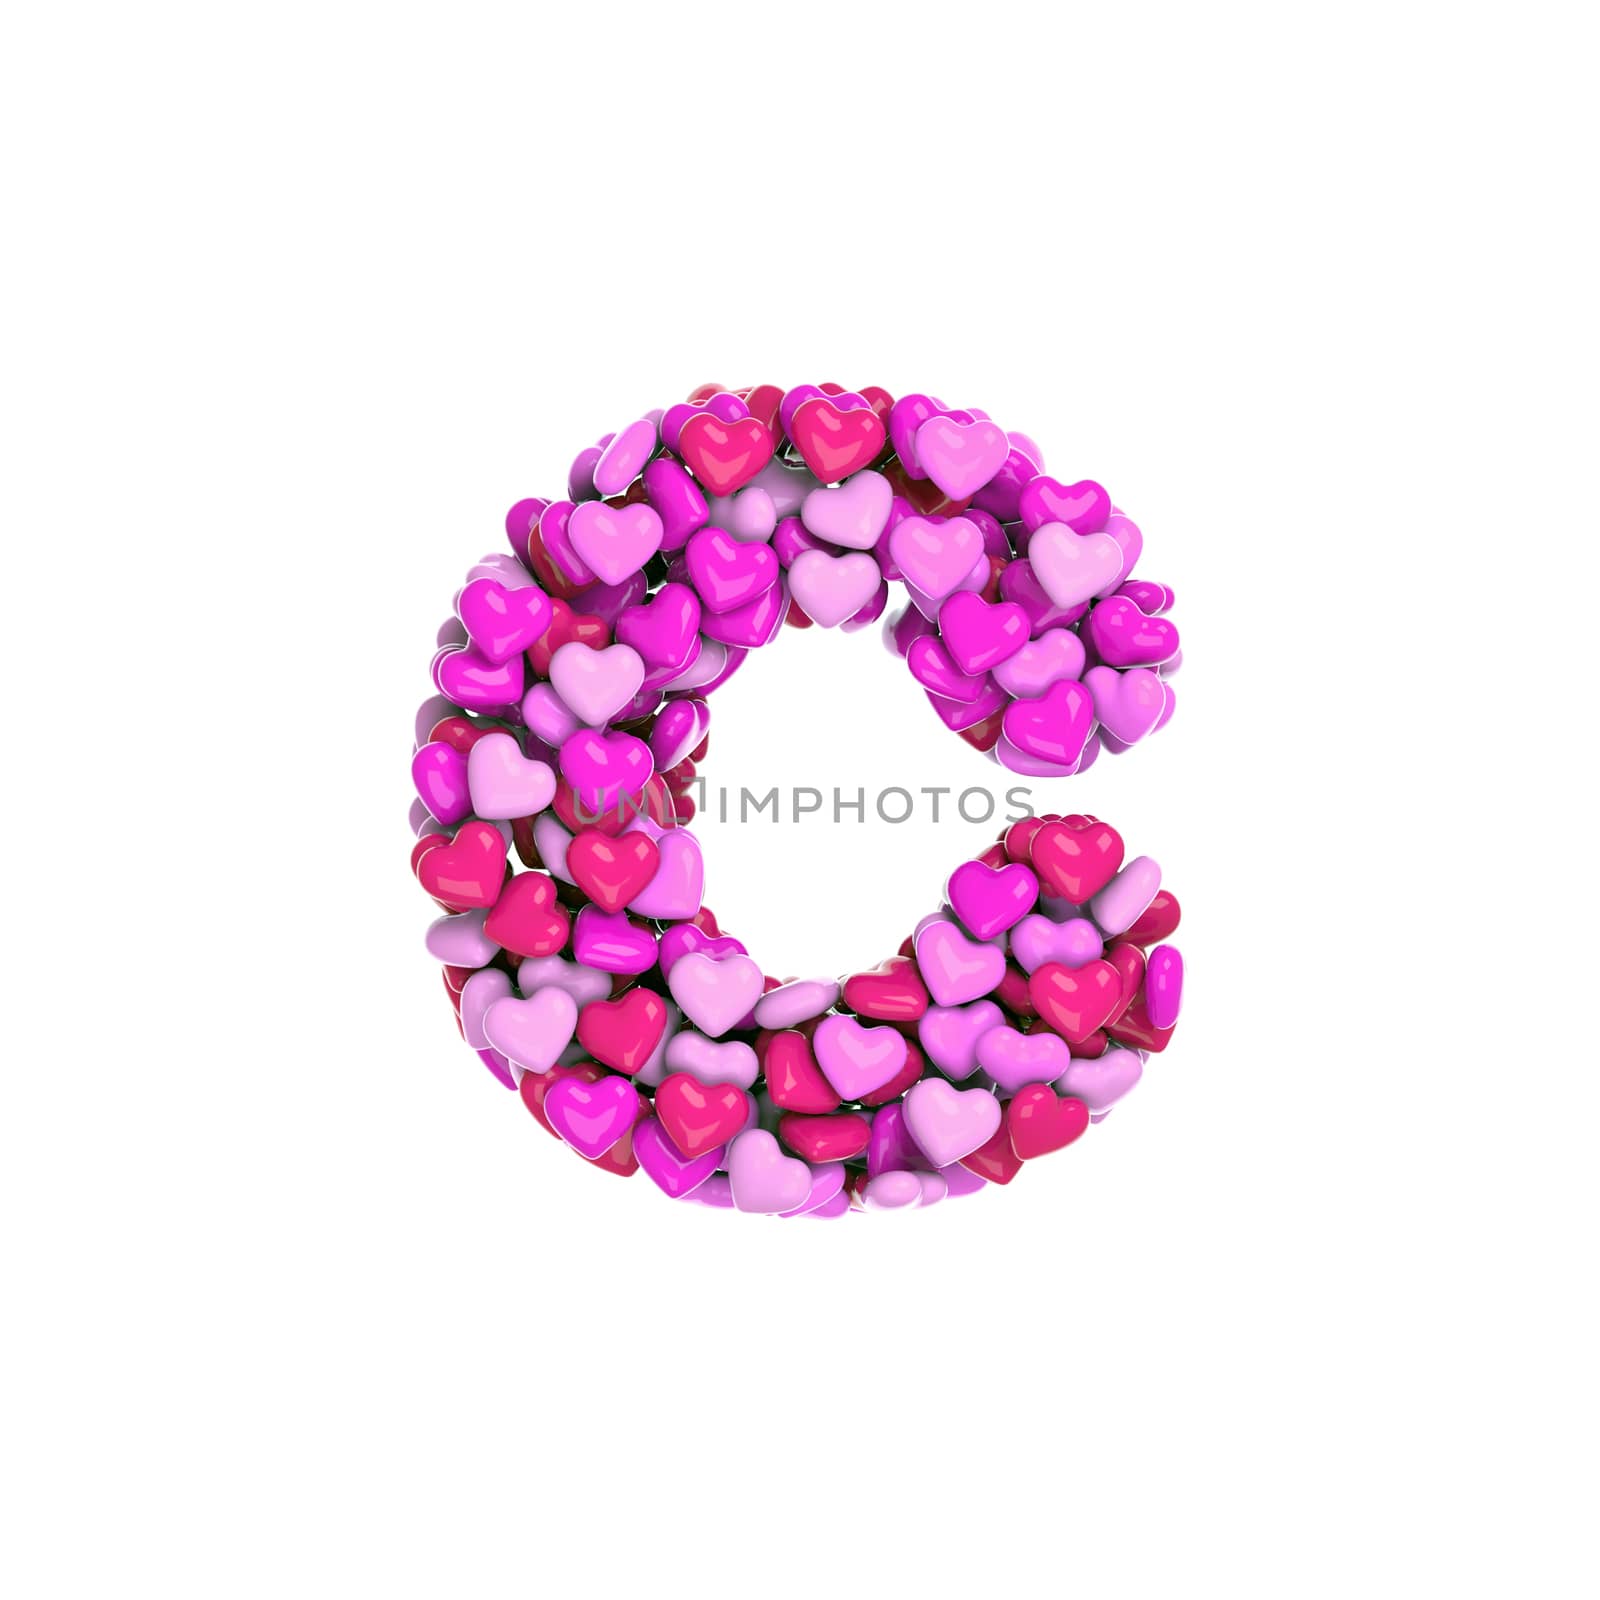 Valentine letter C - Small 3d pink hearts font - Love, passion or wedding concept by chrisroll